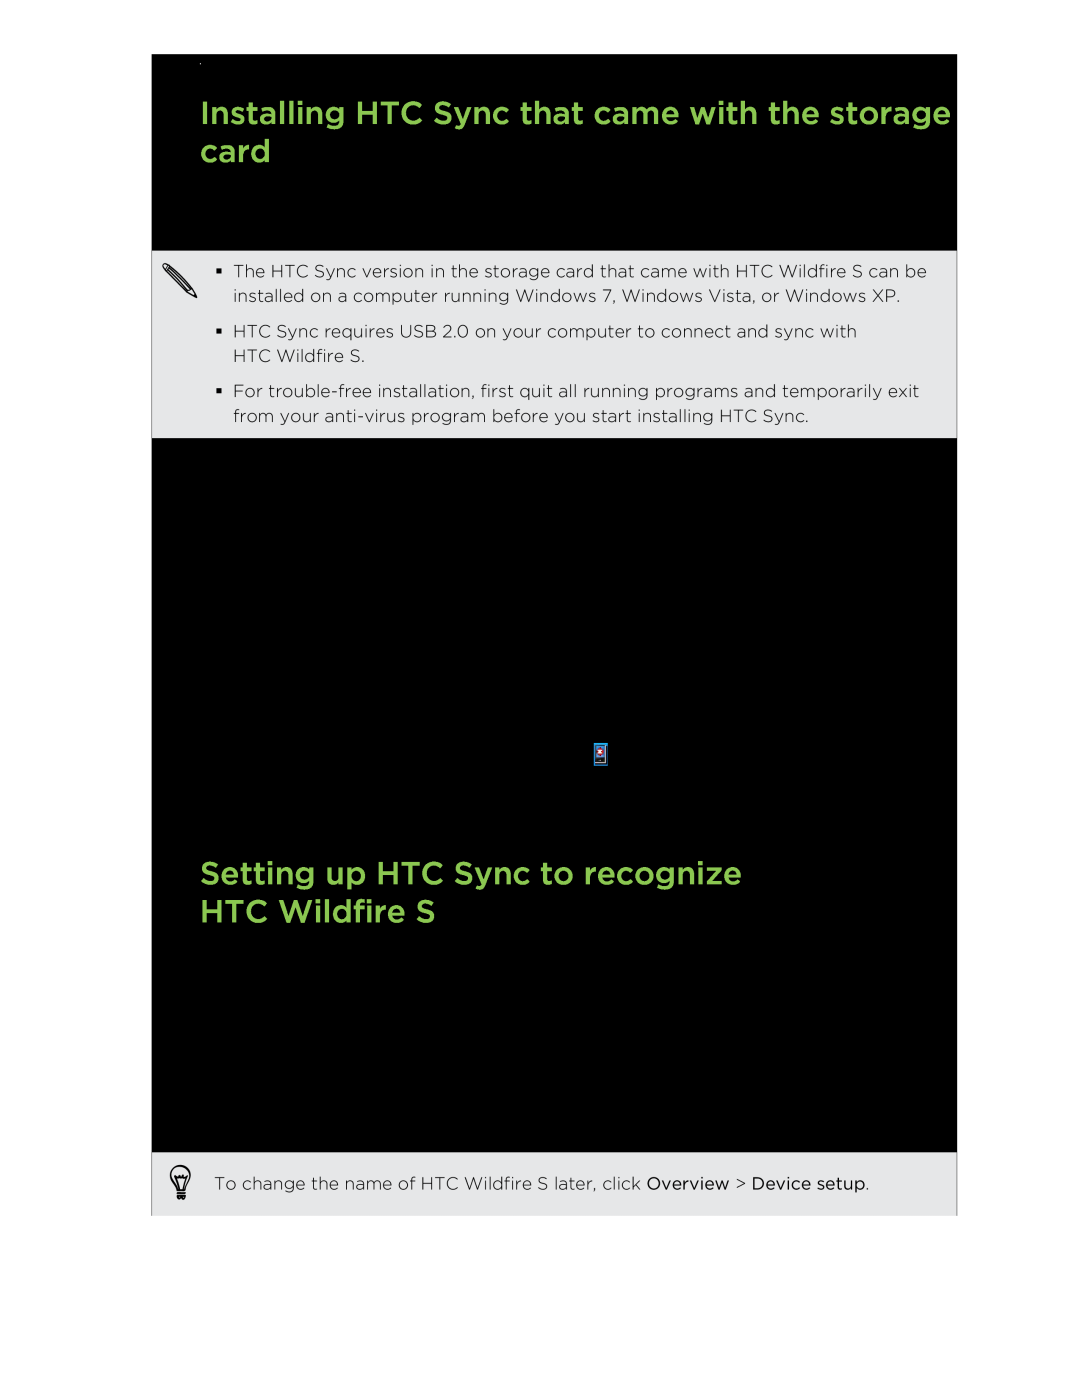 HTC manual Installing HTC Sync that came with the storage card, Setting up HTC Sync to recognize HTC Wildfire S 